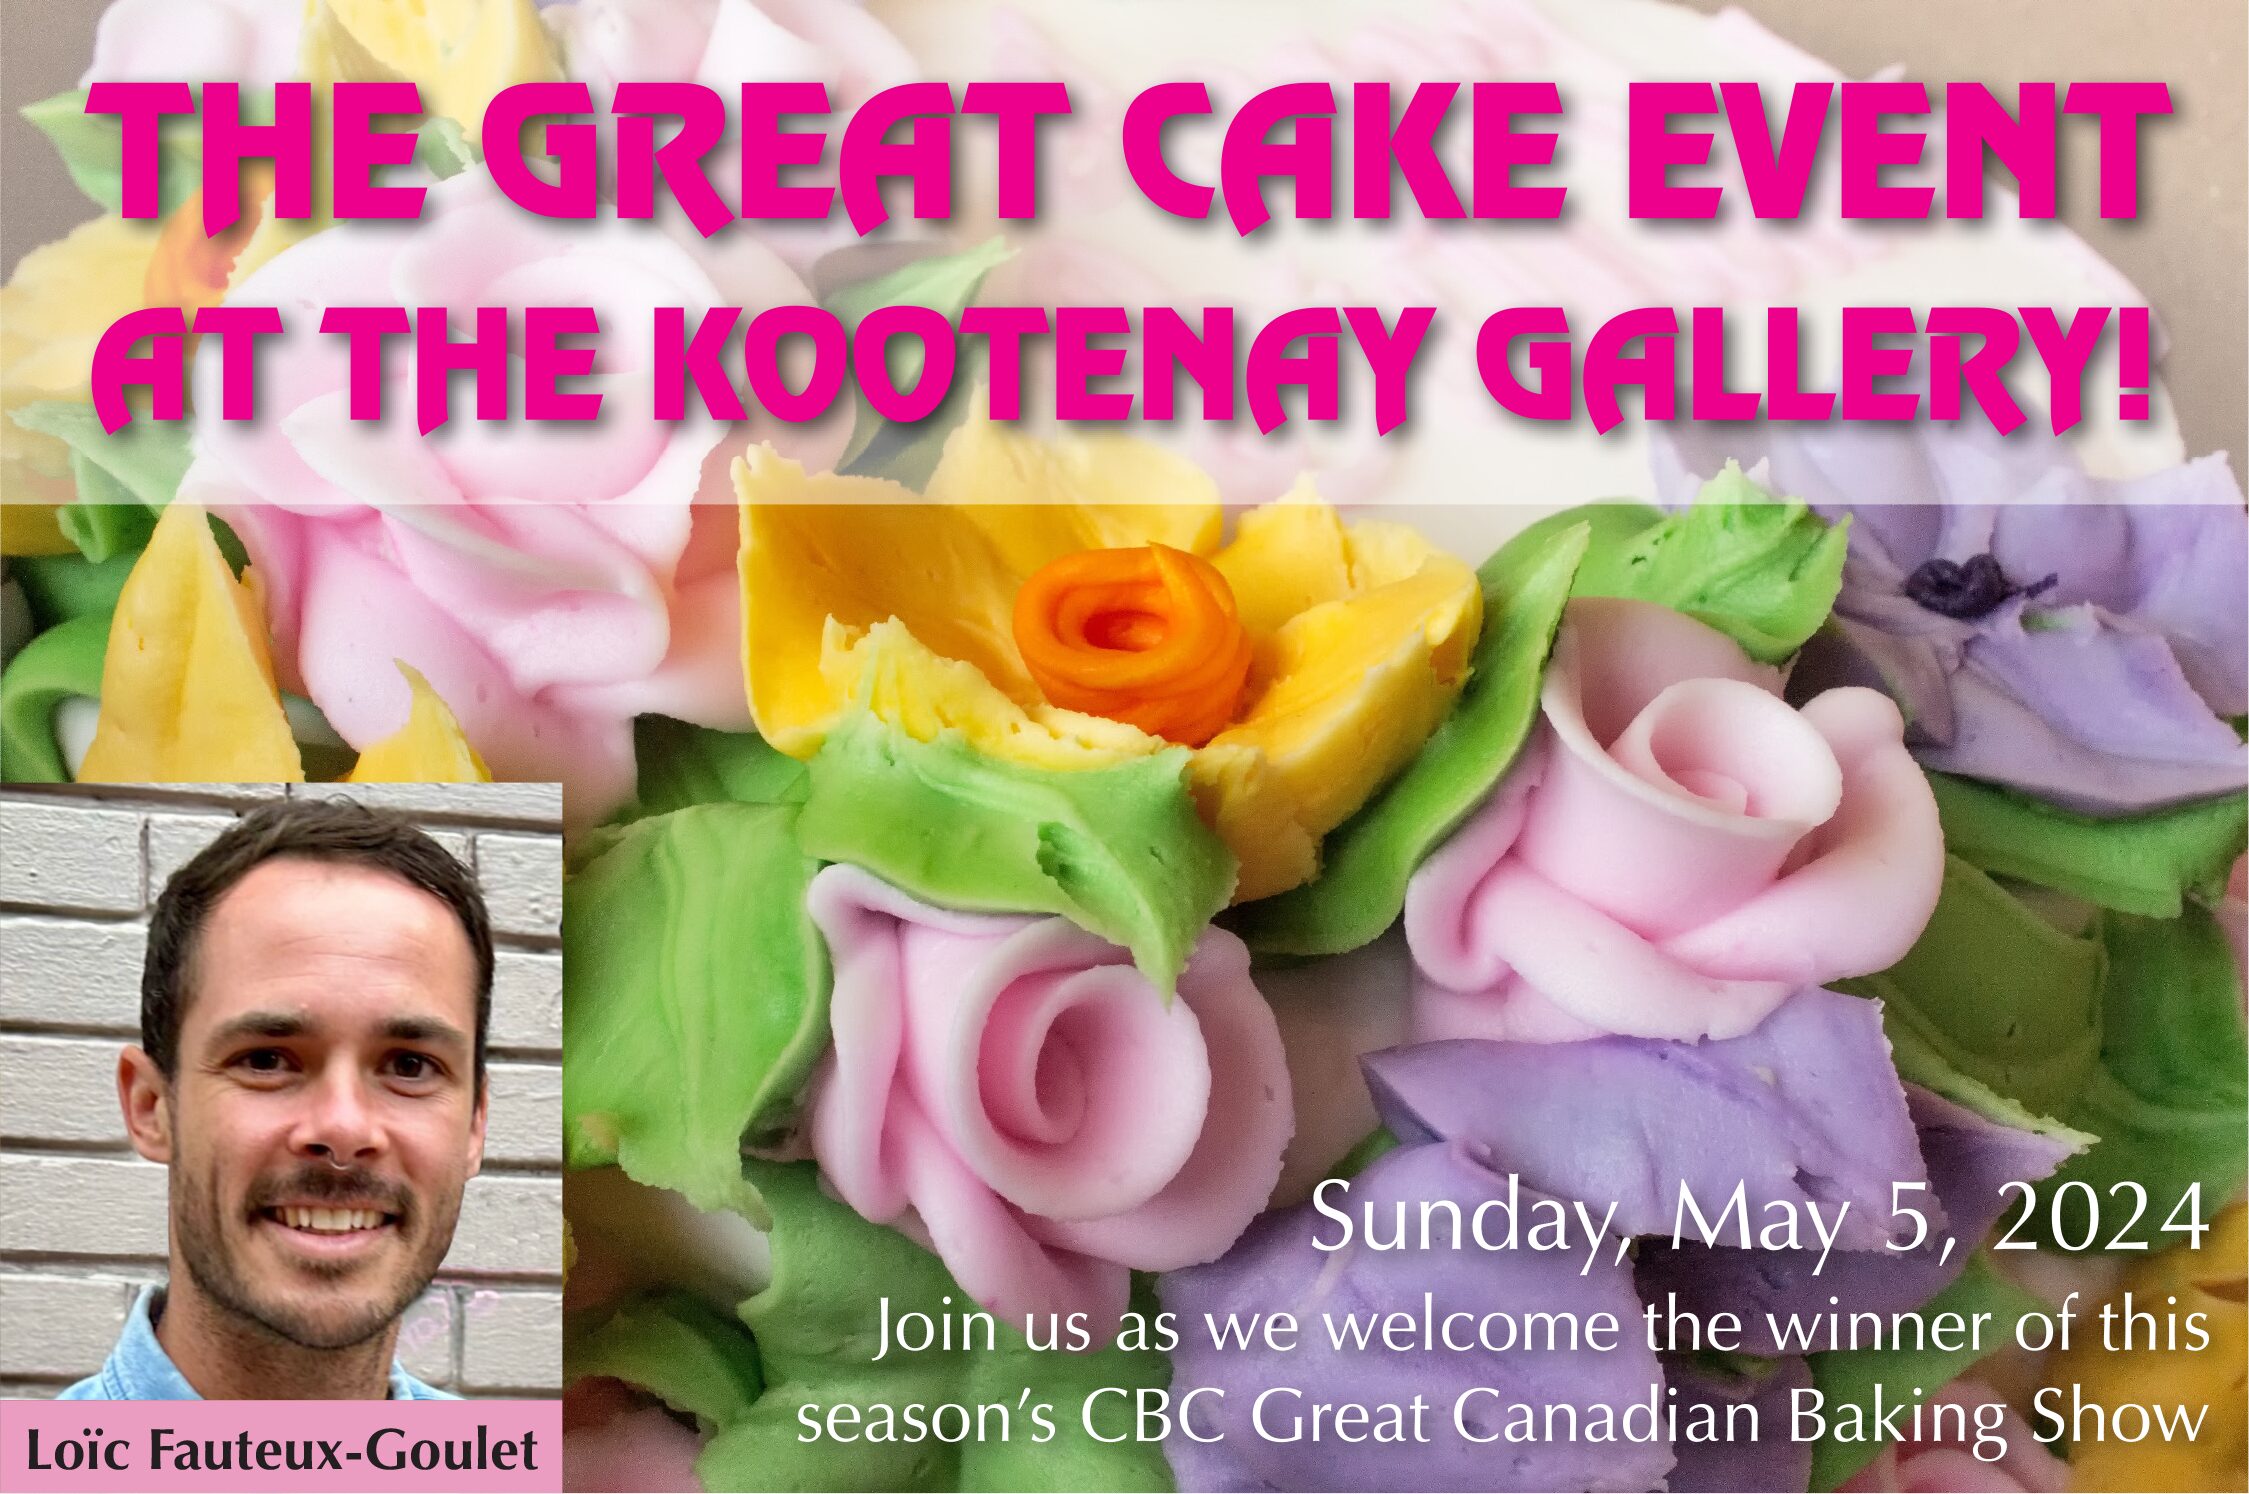 The Great Cake Event at the Kootenay Gallery. Sunday, May 5th, 2024. Join us as we welcome the winner of this season's CBC Great Canadian Baking Show: Loic Fauteux-Goulet. Access event info here.